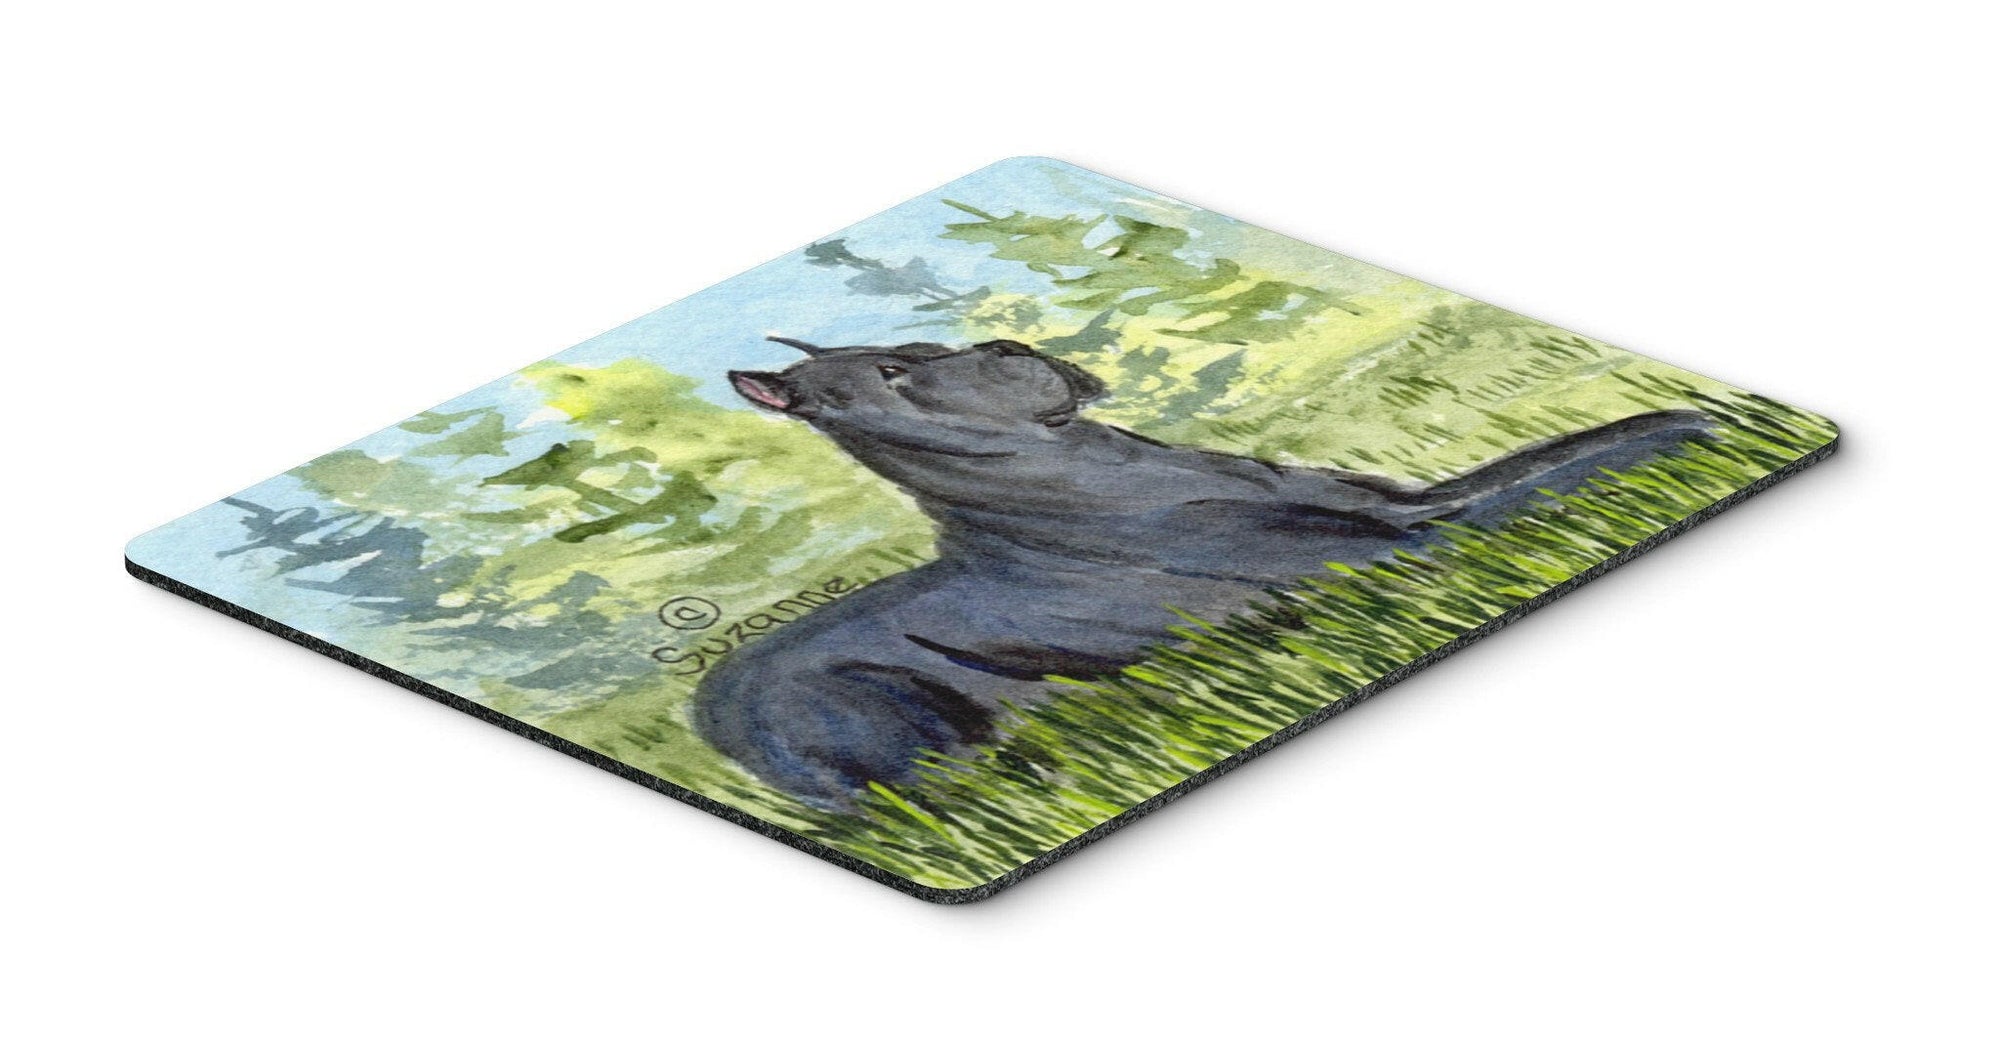 Cane Corso Mouse pad, hot pad, or trivet by Caroline's Treasures